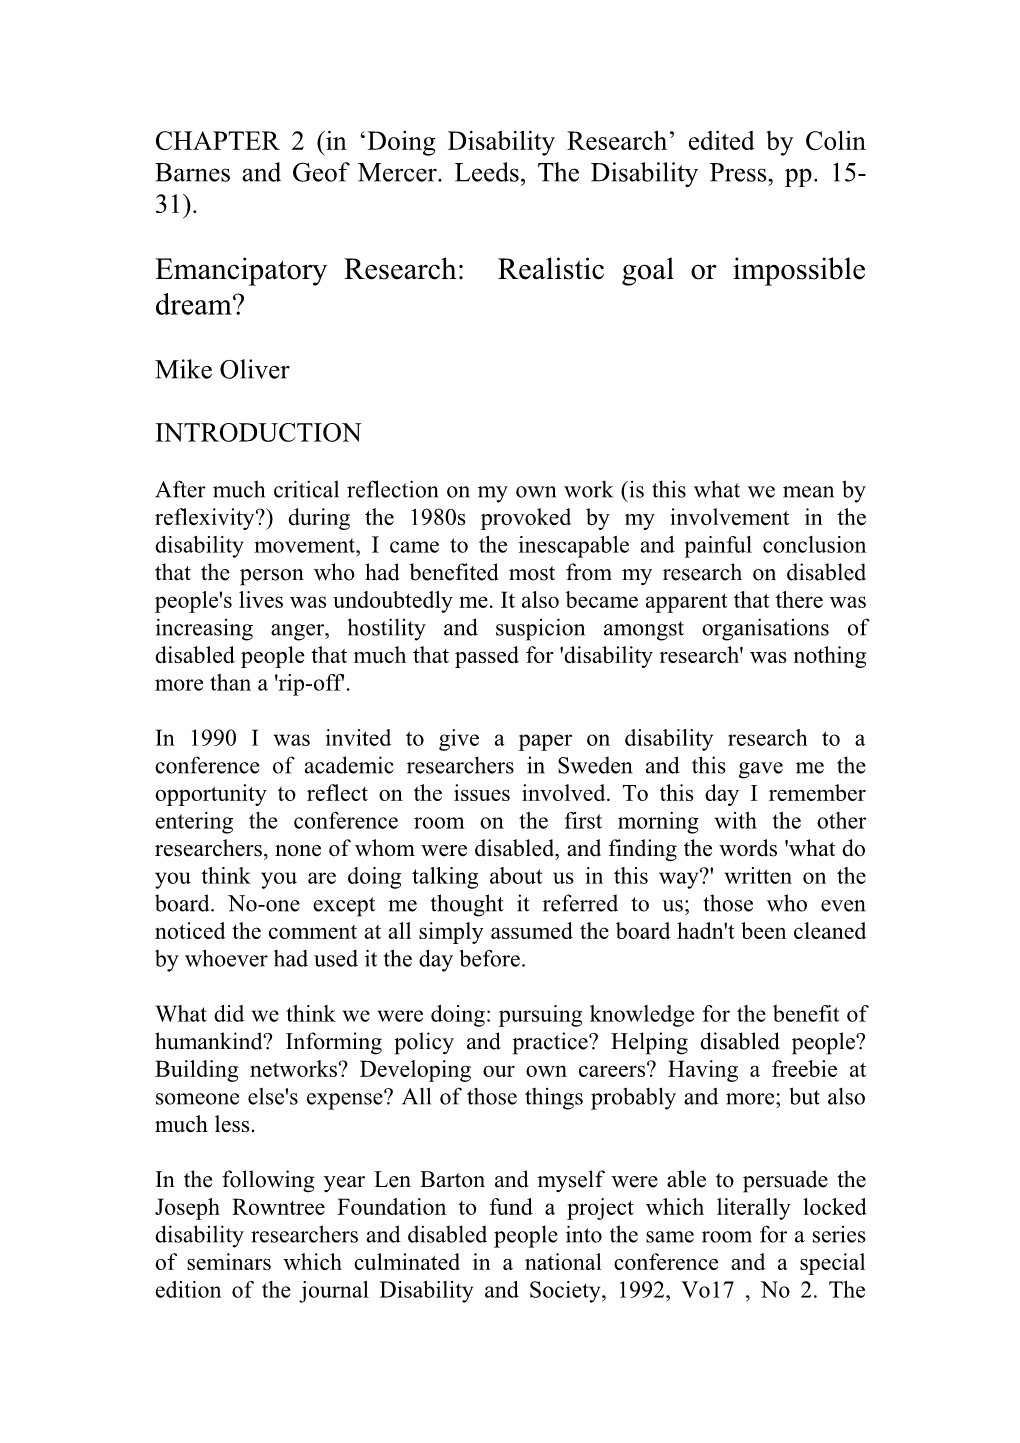 Emancipatory Research: Realistic Goal Or Impossible Dream?